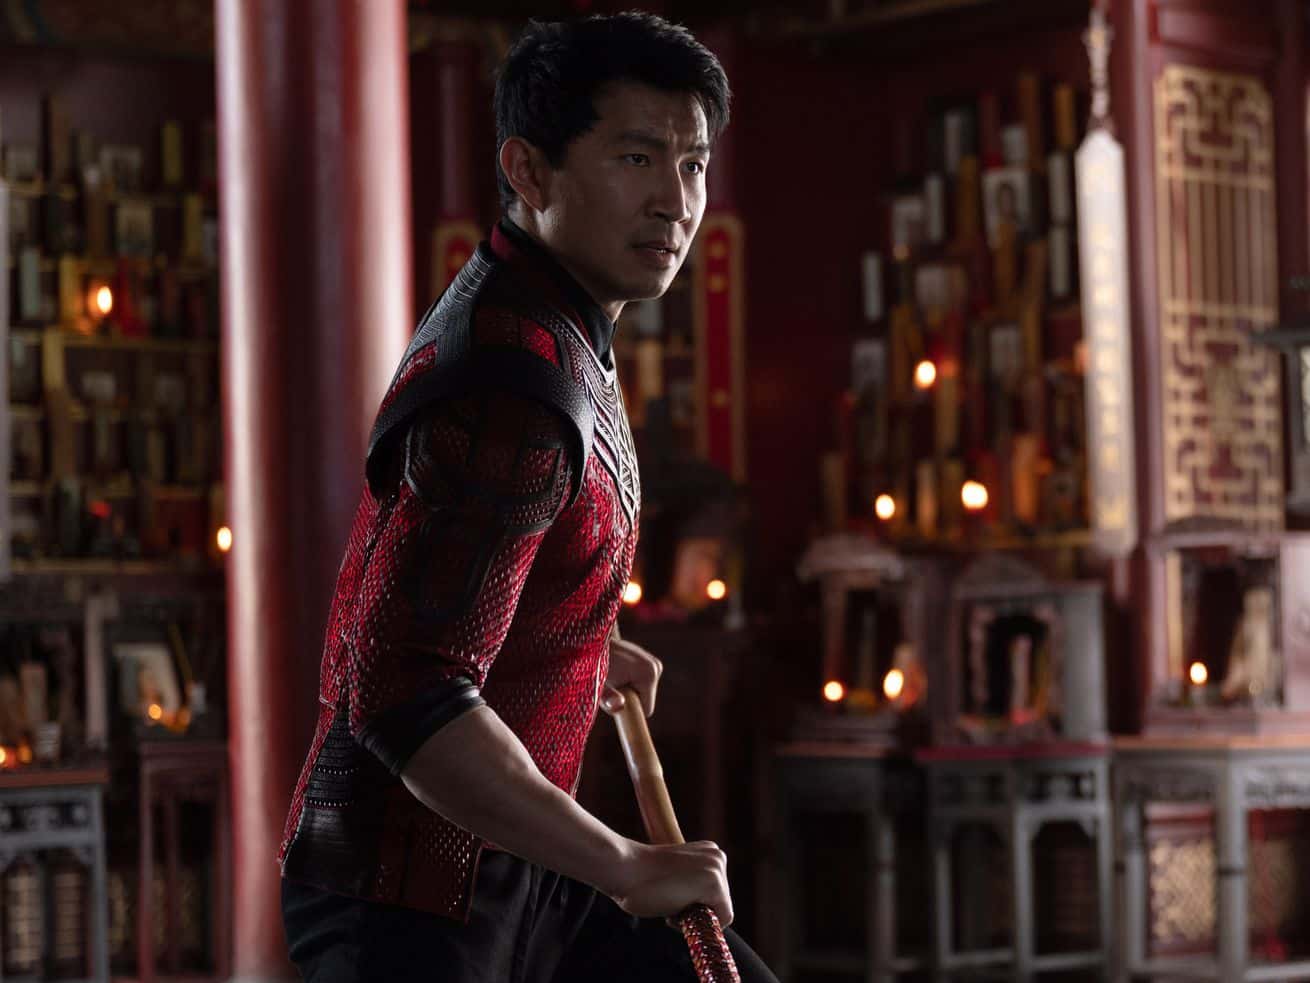 How Shang-Chi’s post-credits scenes shape the future of the MCU